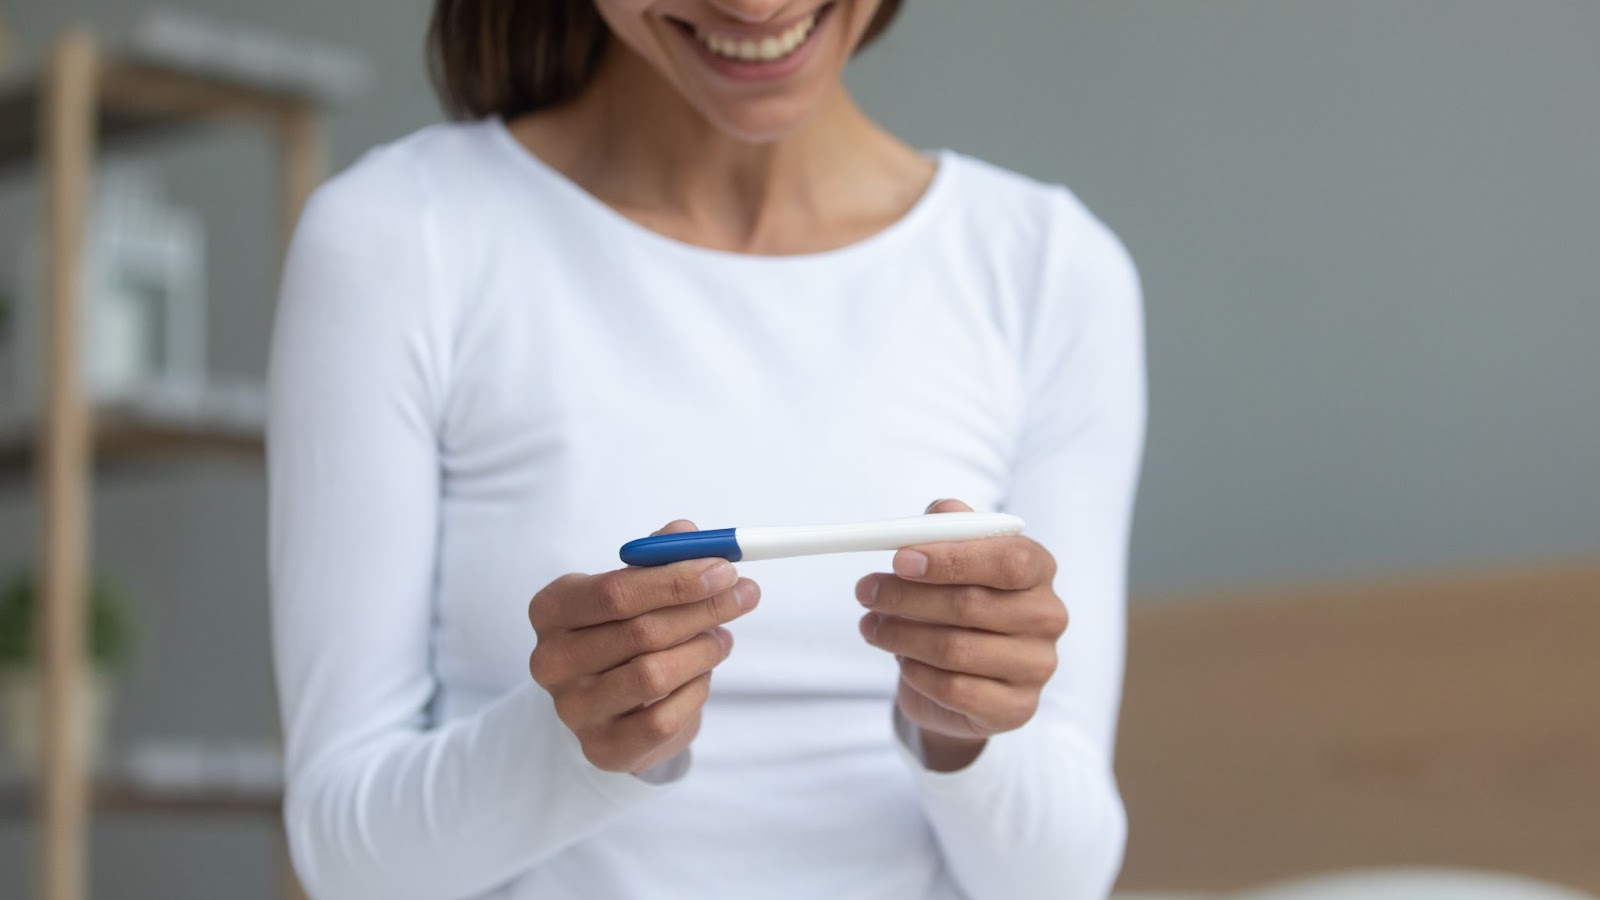 Woman sit indoors close up focus on hands holding pregnancy test, waiting for results.